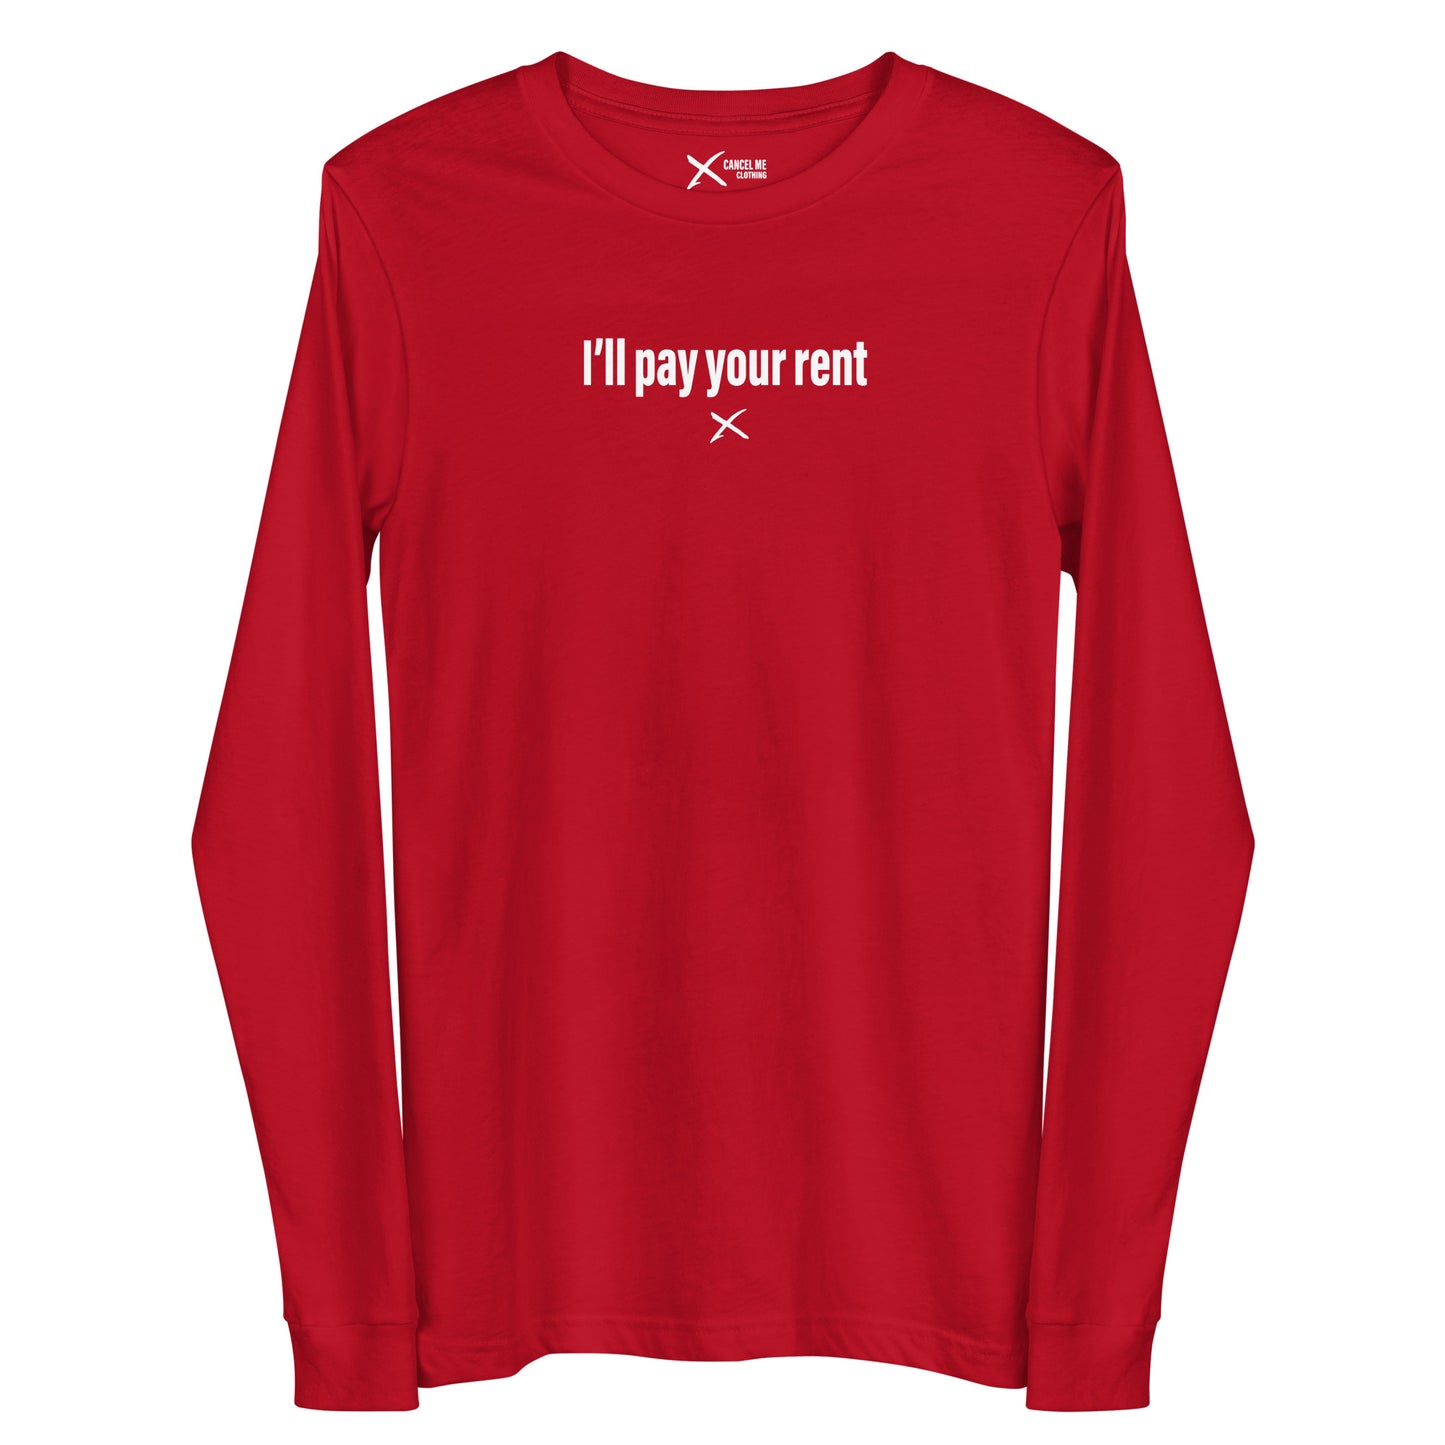 I'll pay your rent - Longsleeve